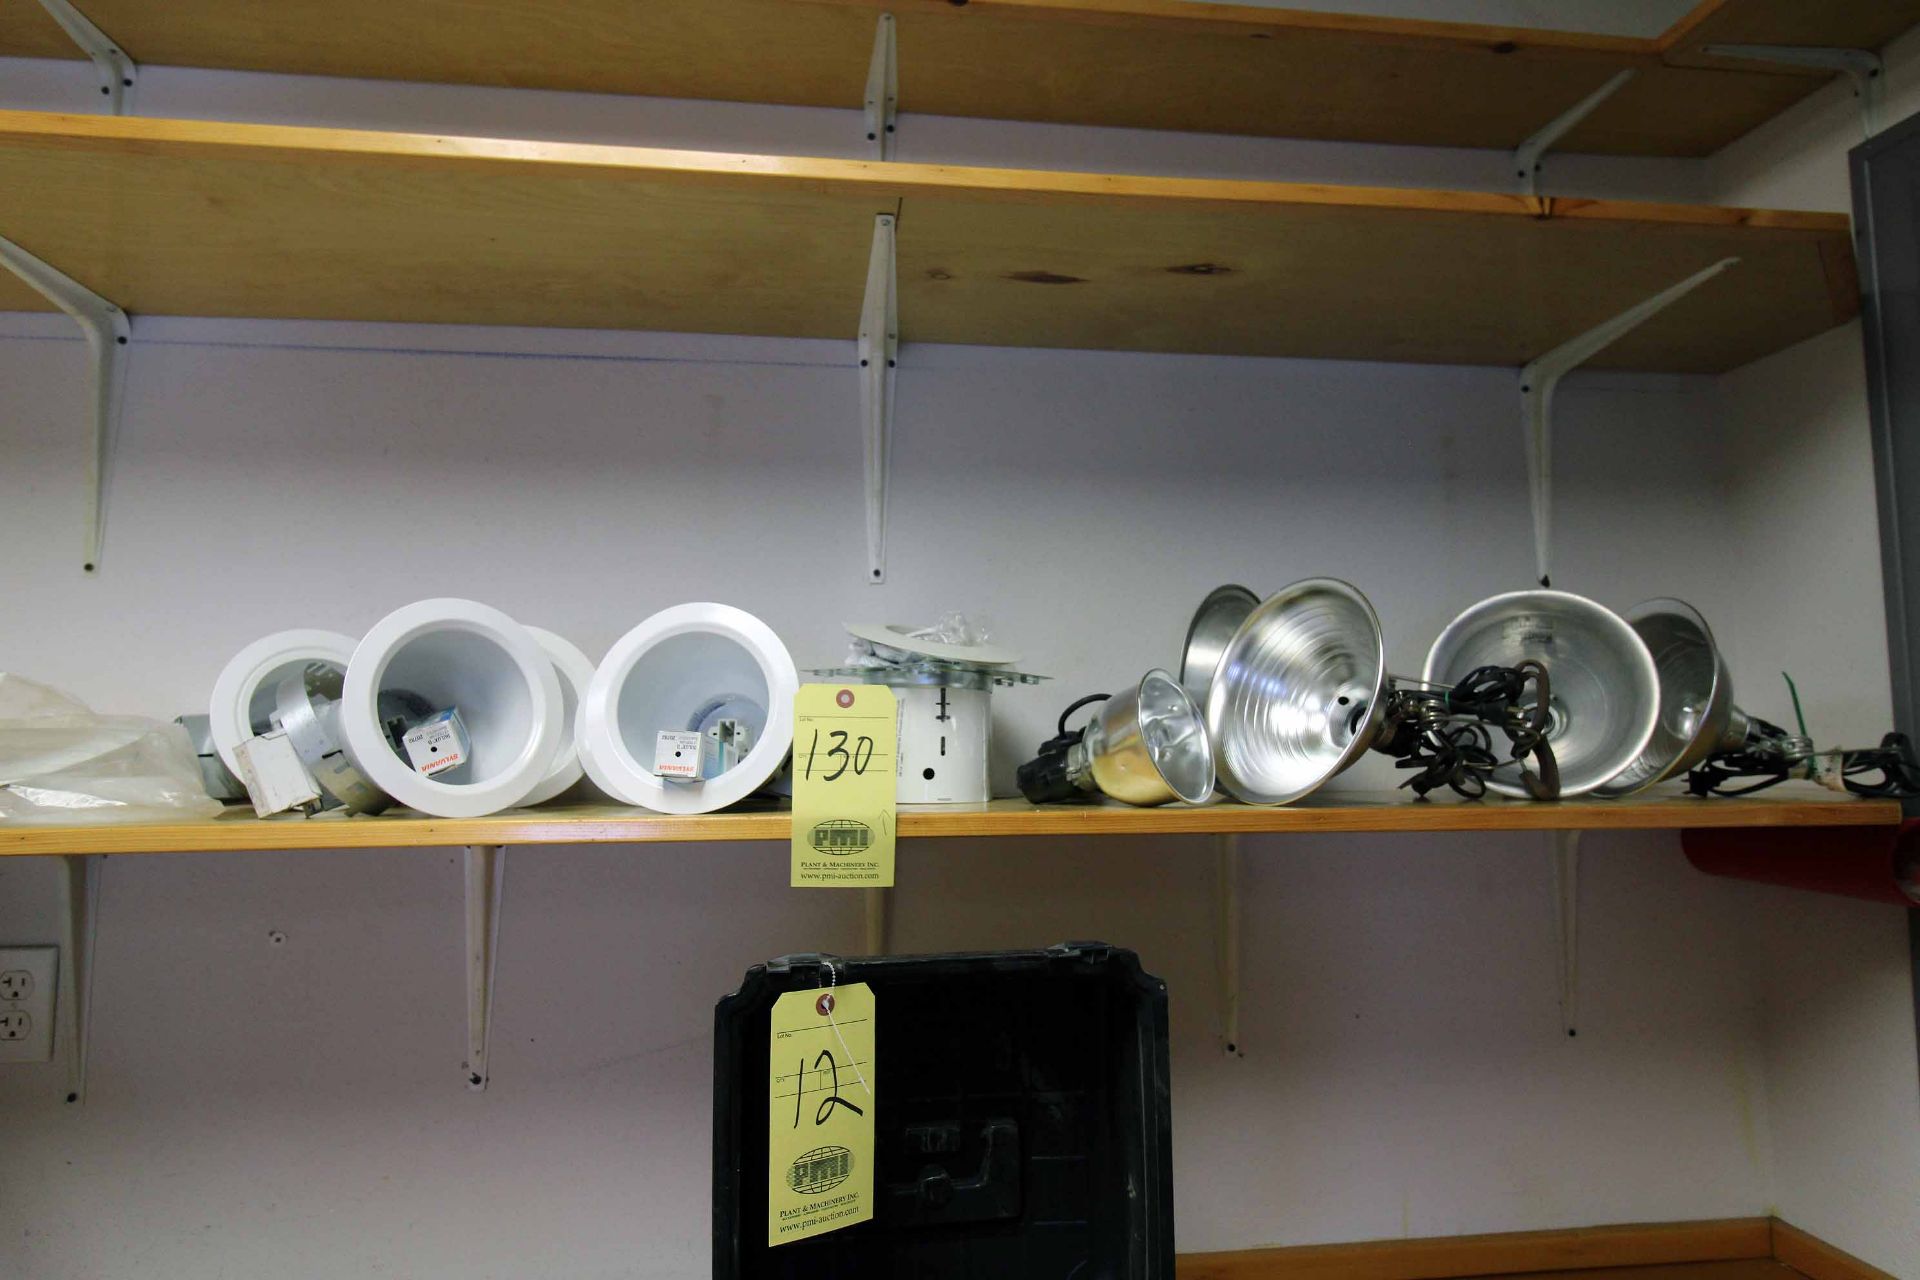 LOT CONSISTING OF: (5) clamp-on lights & (6) recessed lighting fixtures, w/bulbs (Located at: